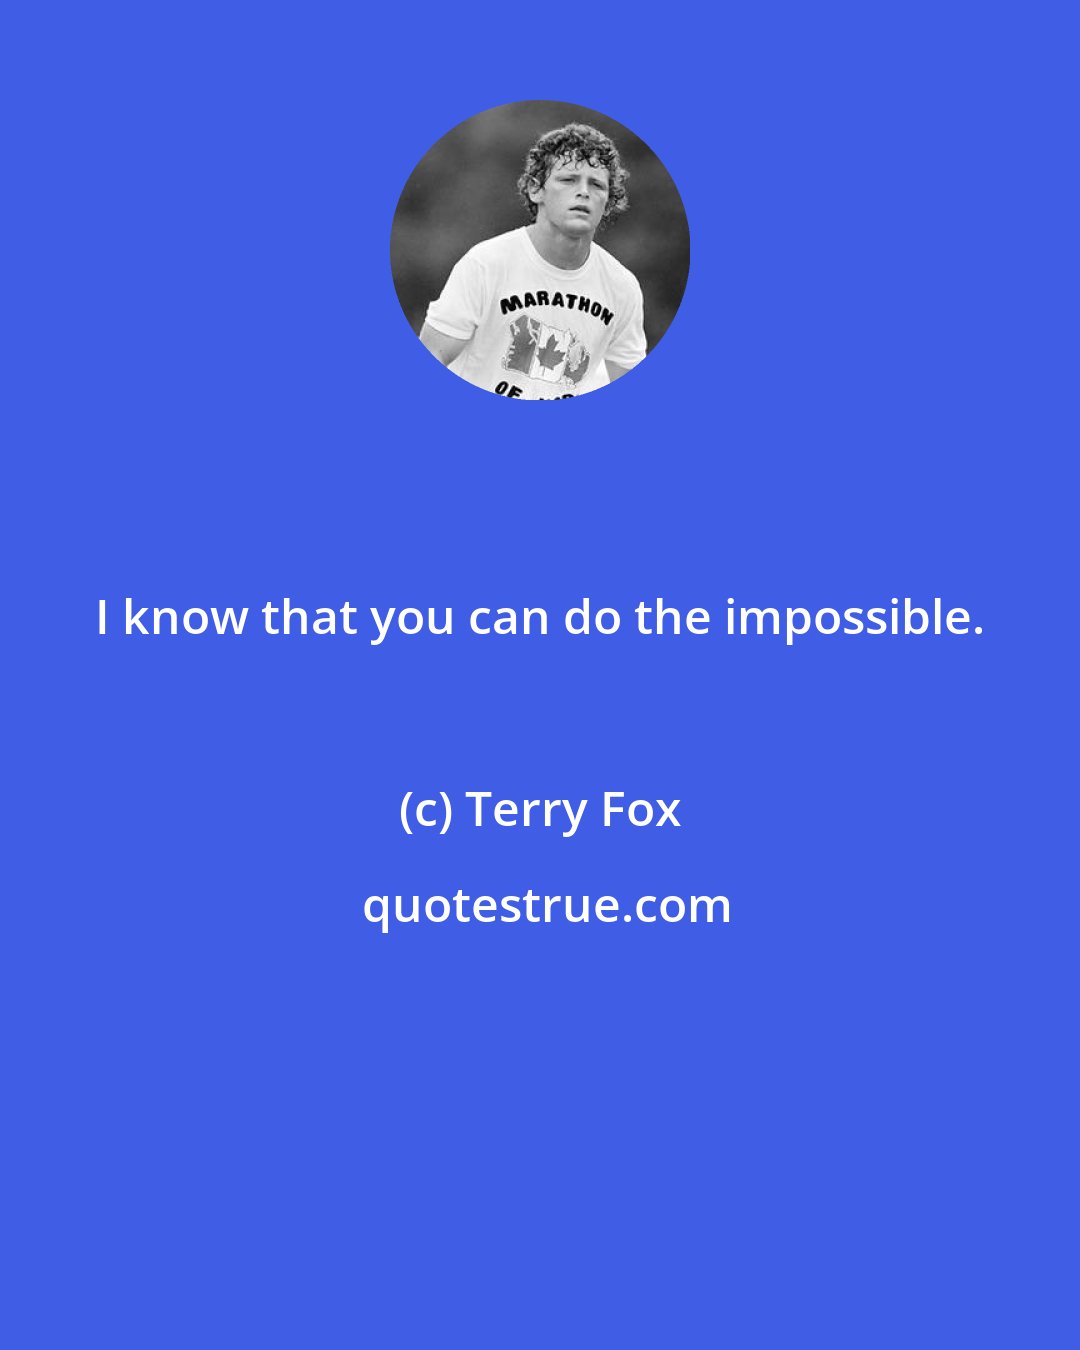 Terry Fox: I know that you can do the impossible.